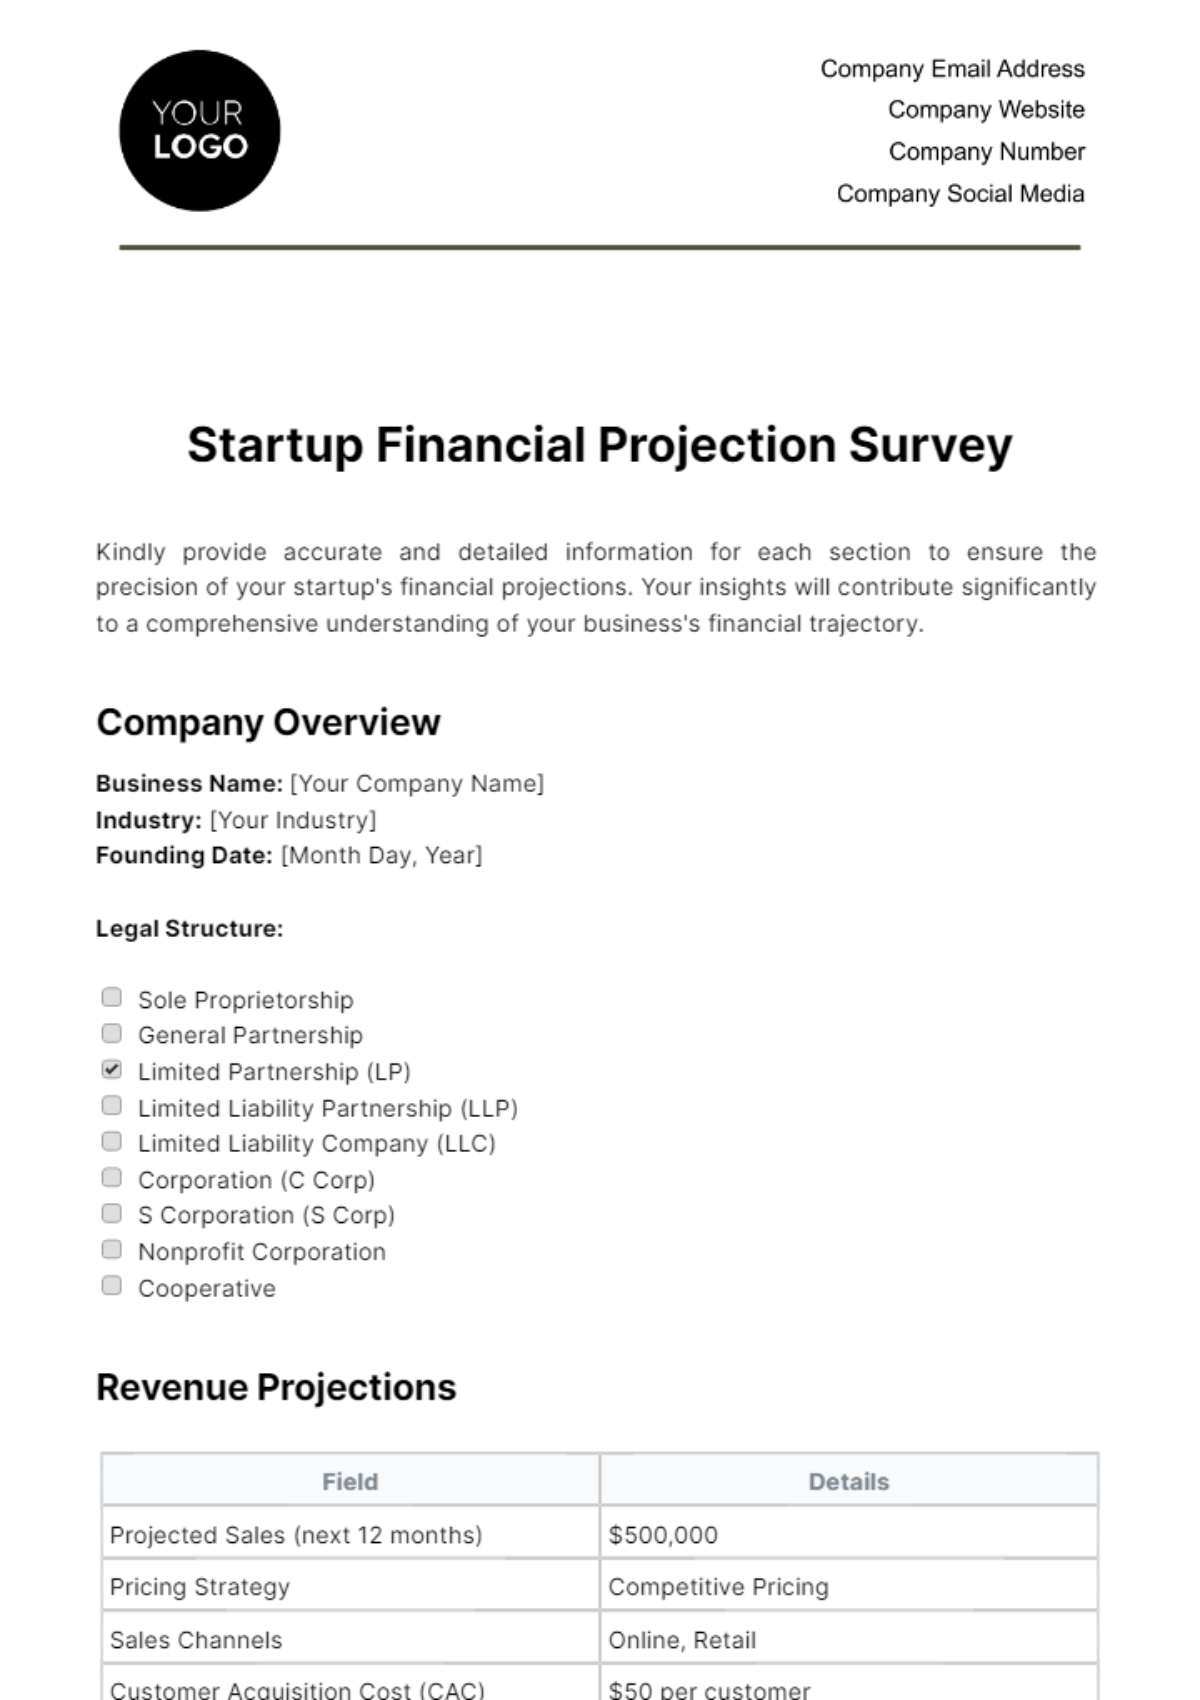 Startup Financial Projection Survey Template